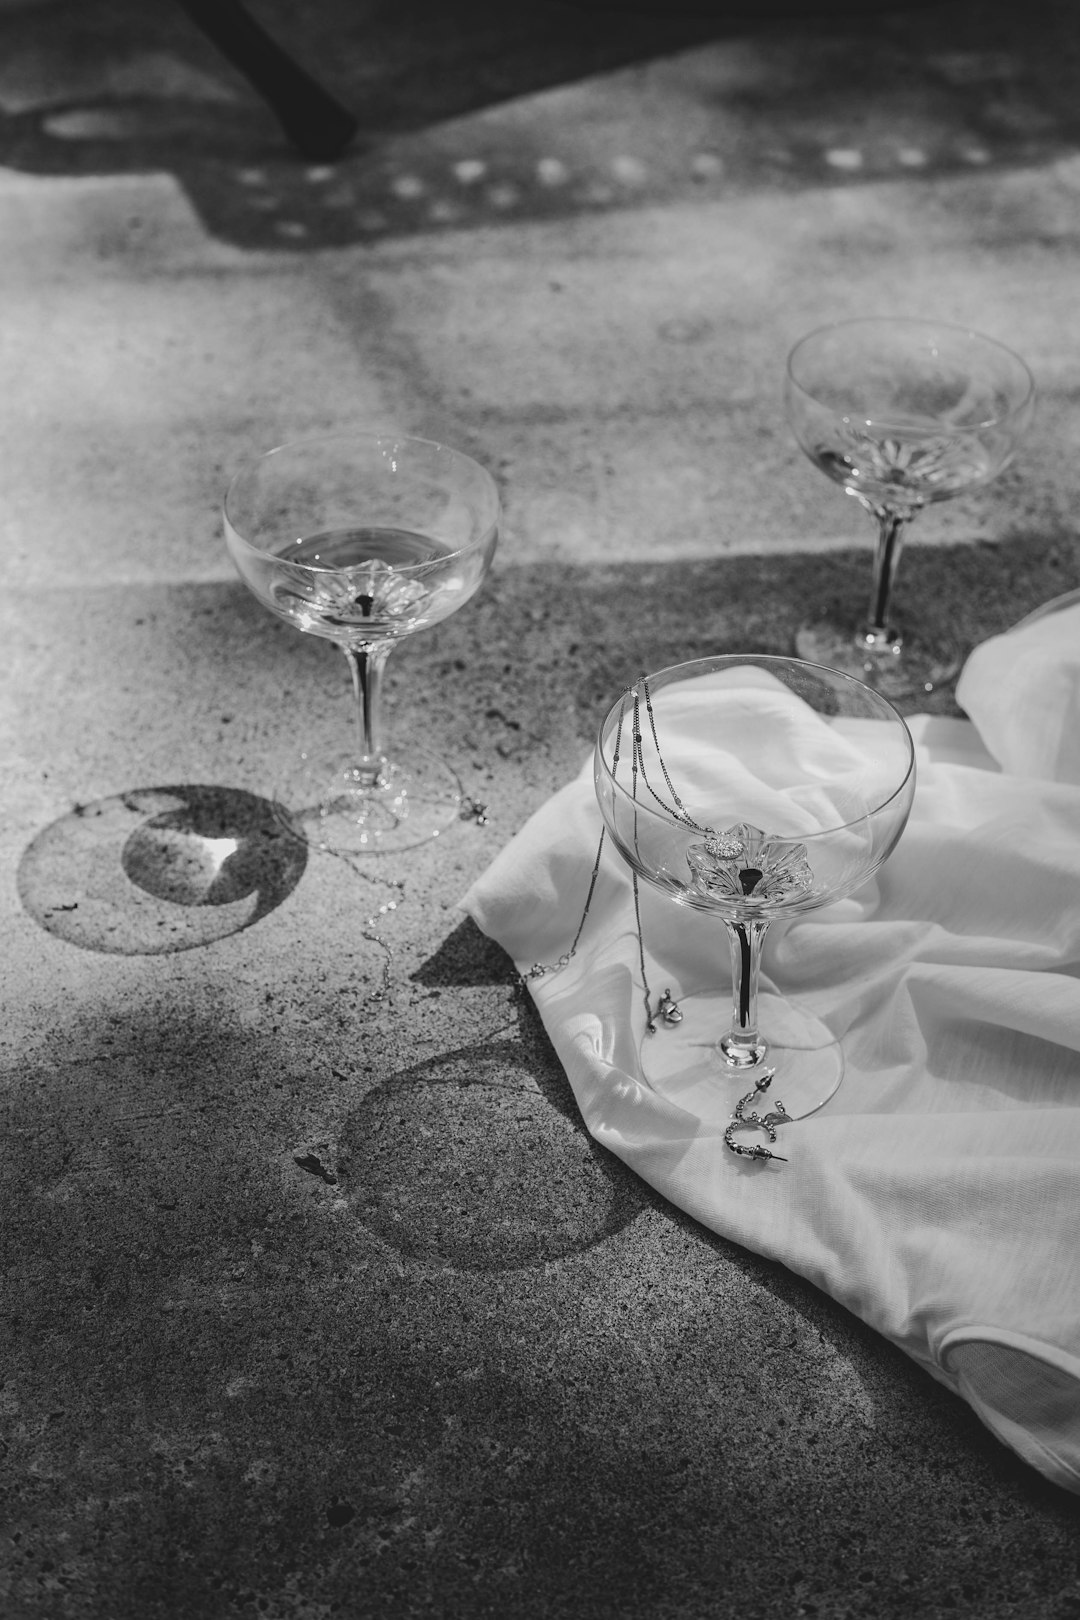 grayscale photo of wine glass and wine glass on table